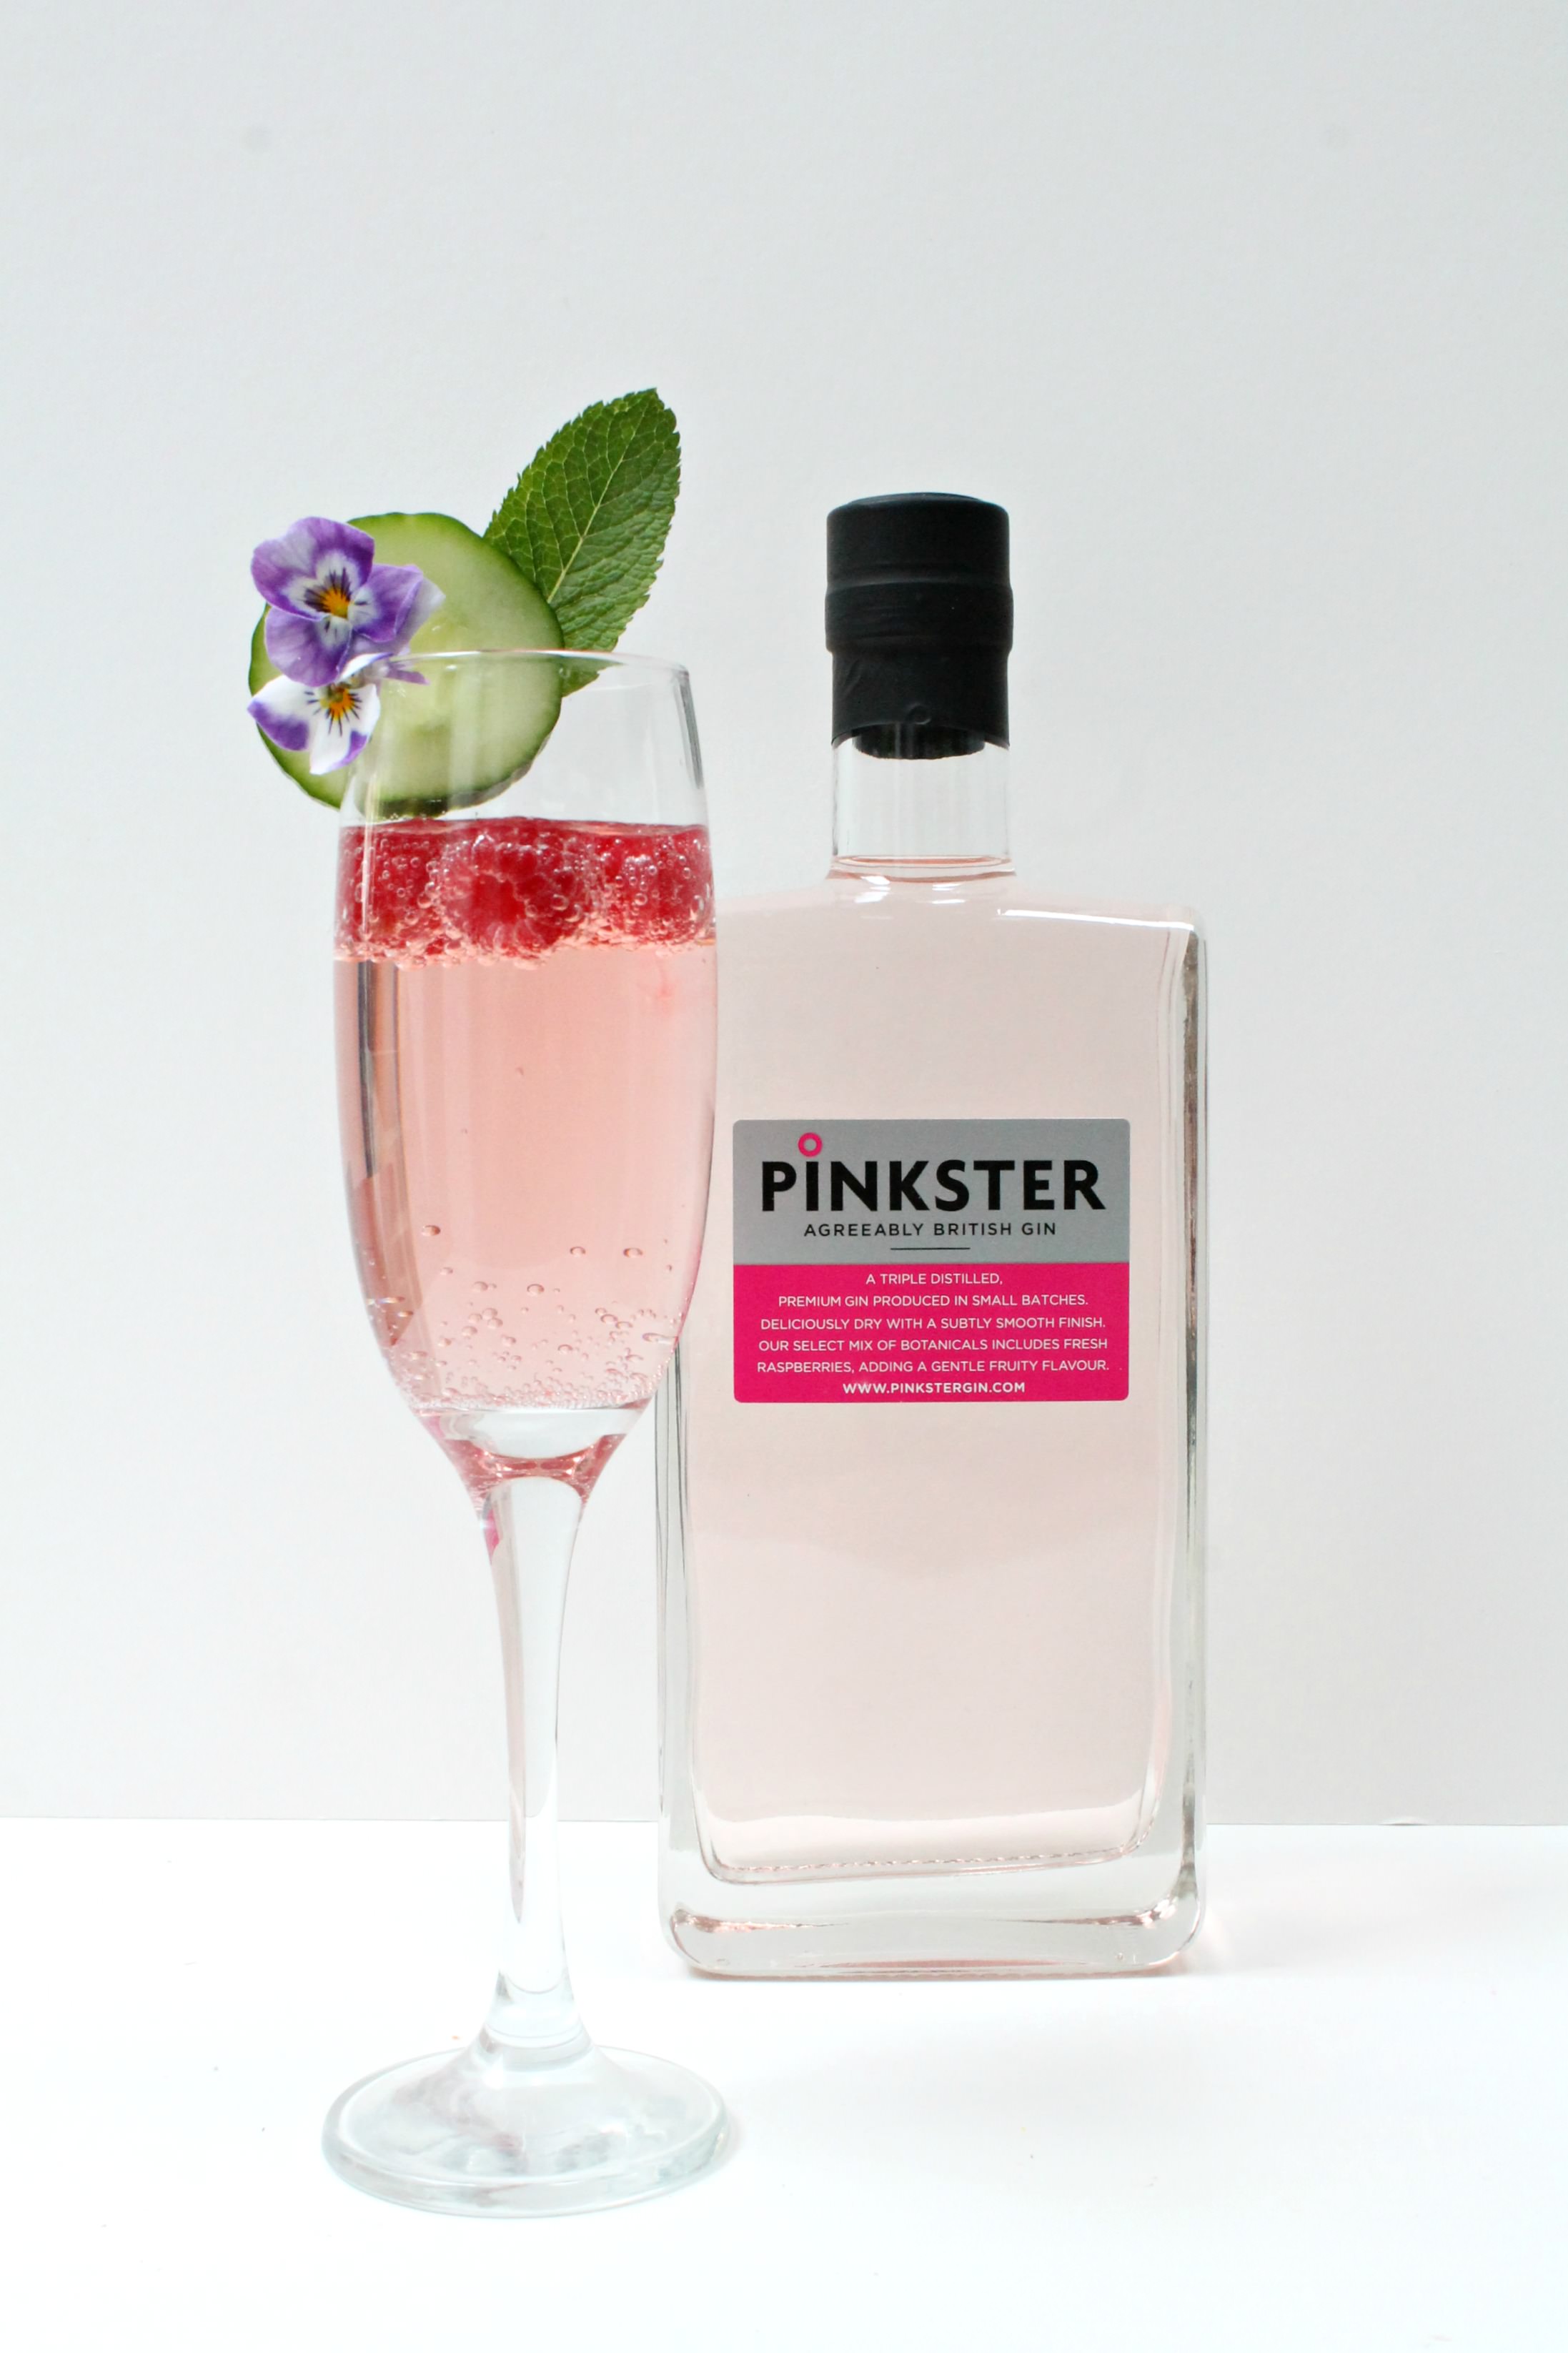 Pinkster-gin-photo-by-Little-Big-Bell